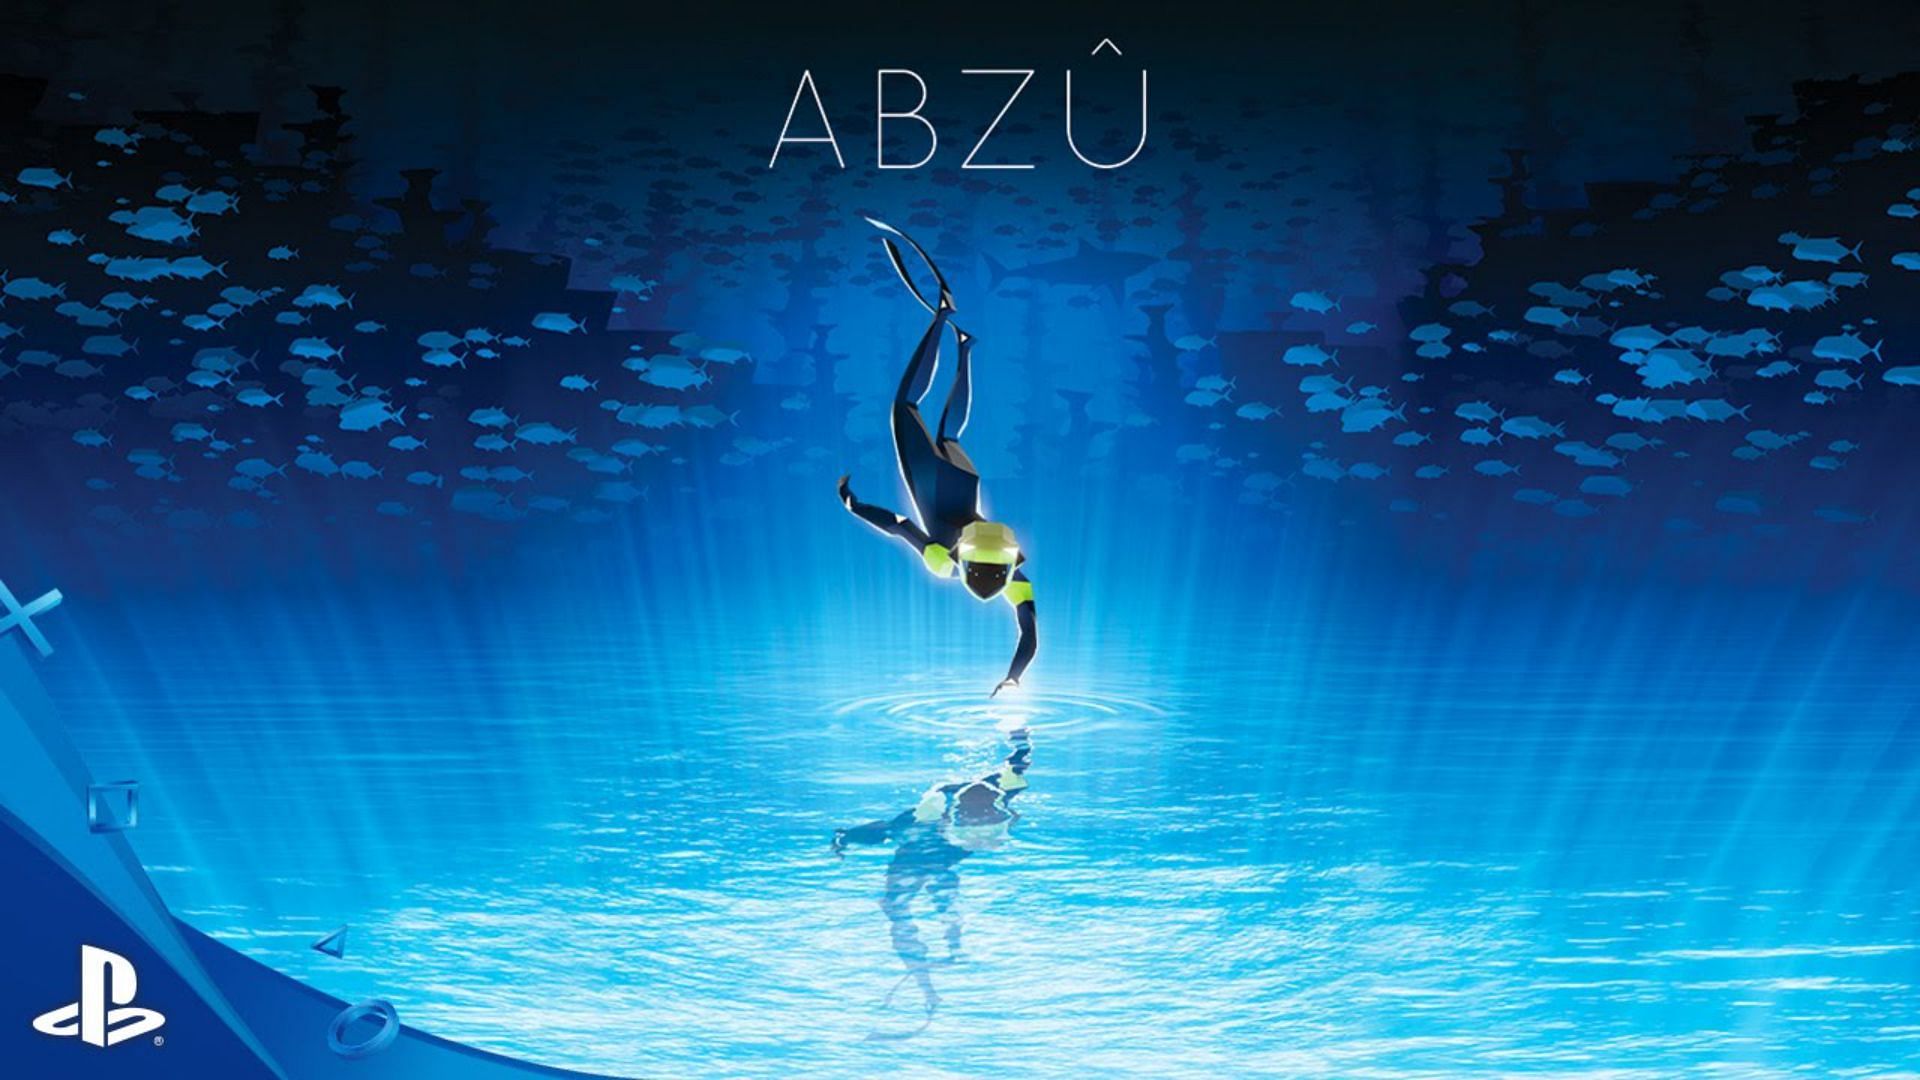 Abzu official poster (Image via PlayStation)